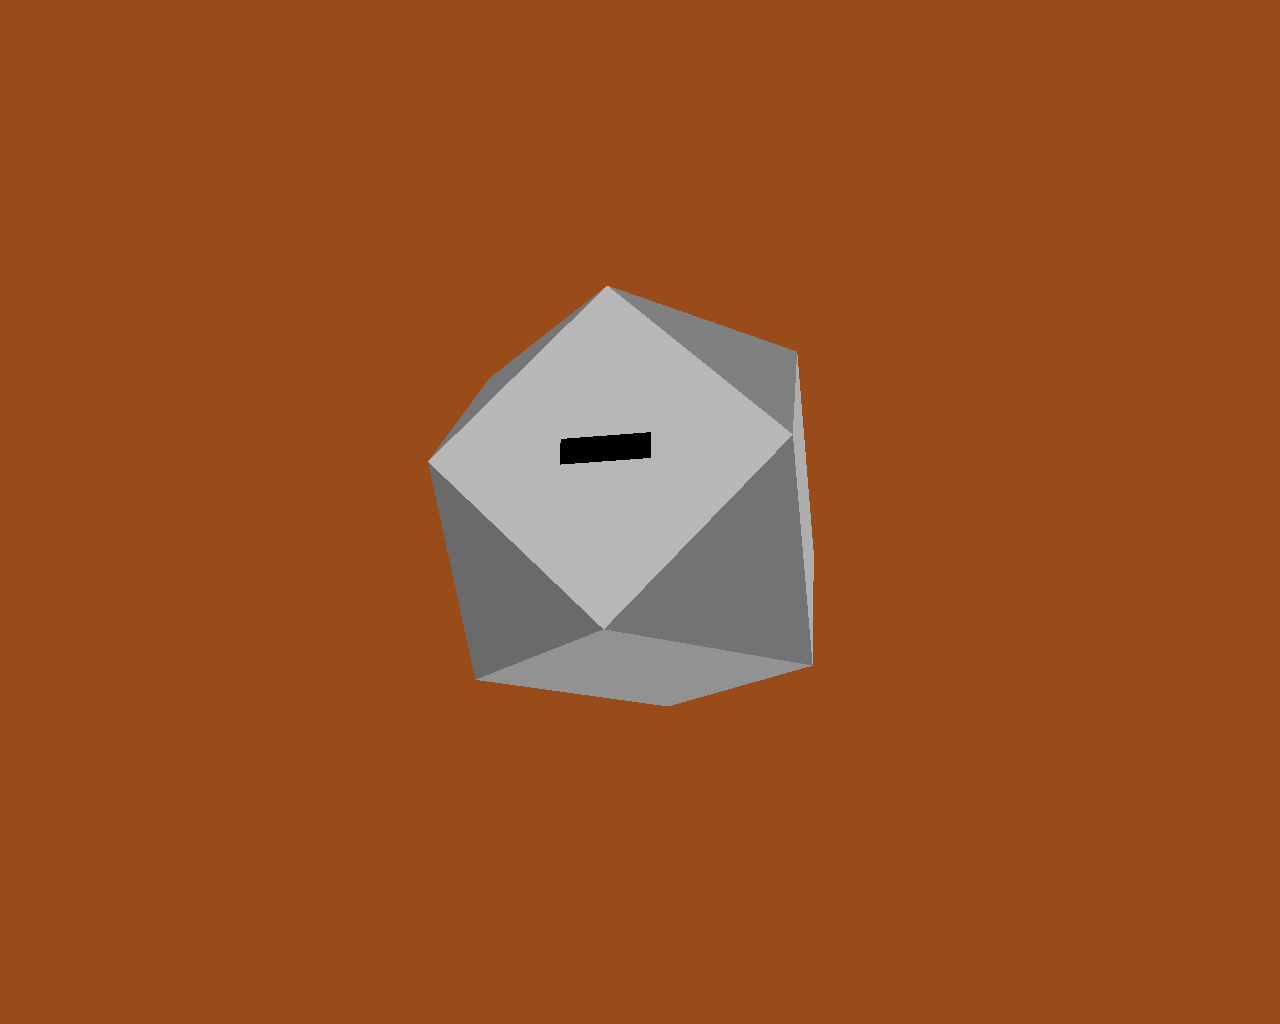 A truncated cube with entrance